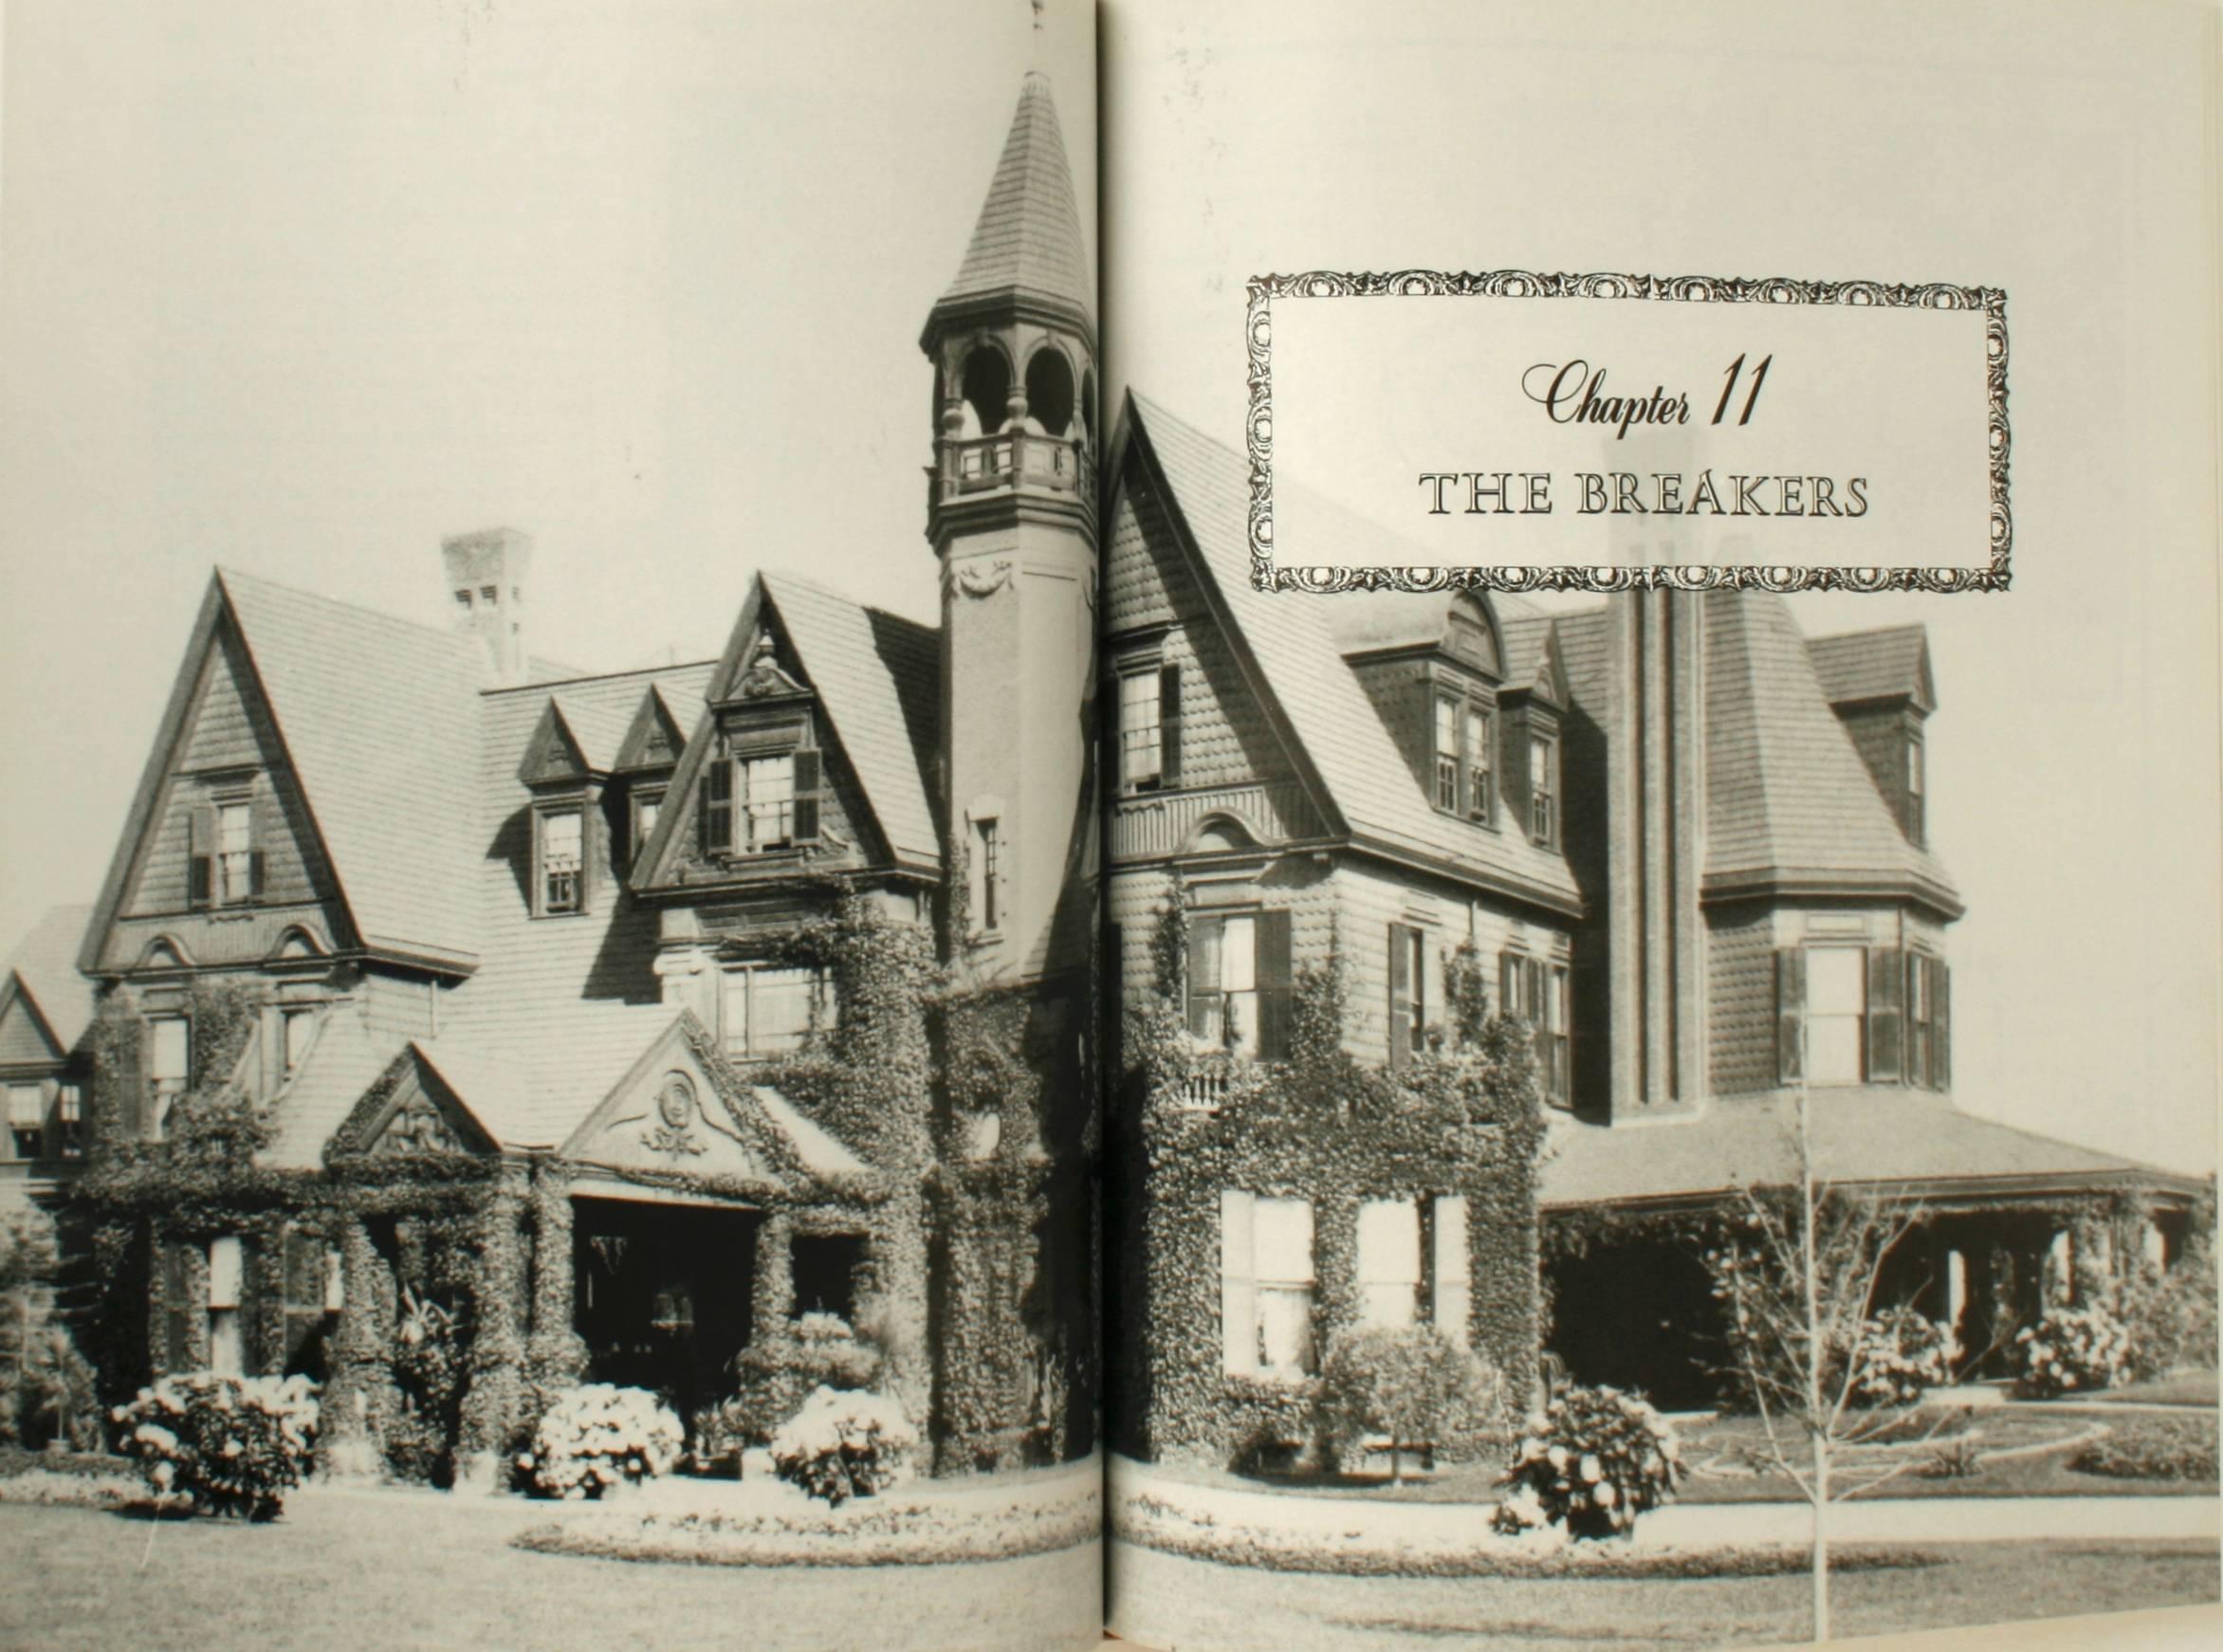 Paper “The Vanderbilts and the Gilded Age: Architectural Aspirations, 1879-1901”, Book